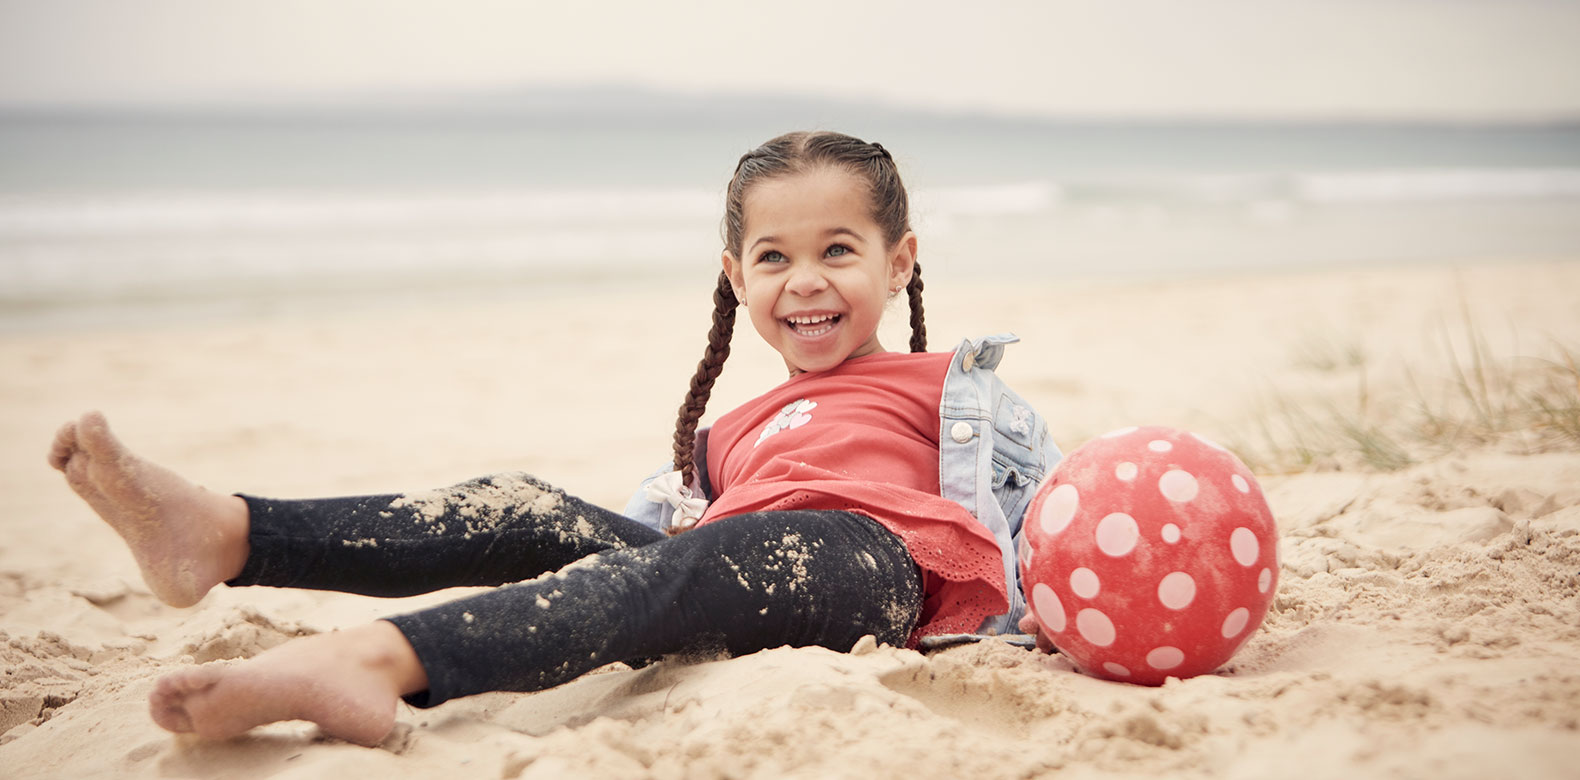 a girl playing with a beach ball on a beach sitting in the sand and smiling